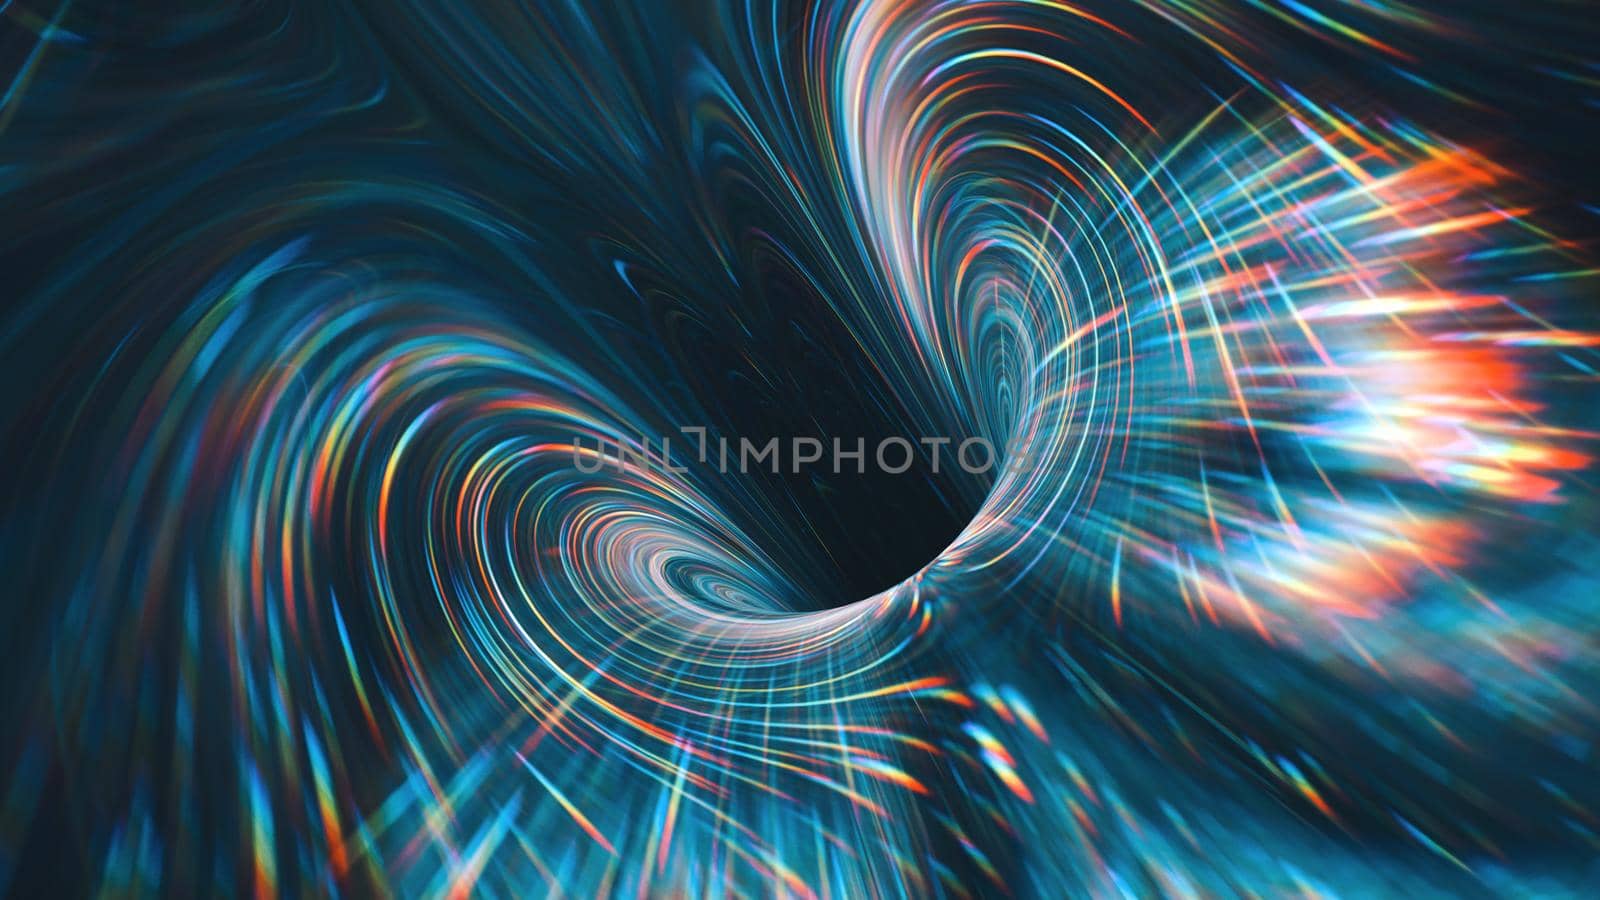 Spacetime Scifi Digital Arts concept distortion warp on space bended curved as hole